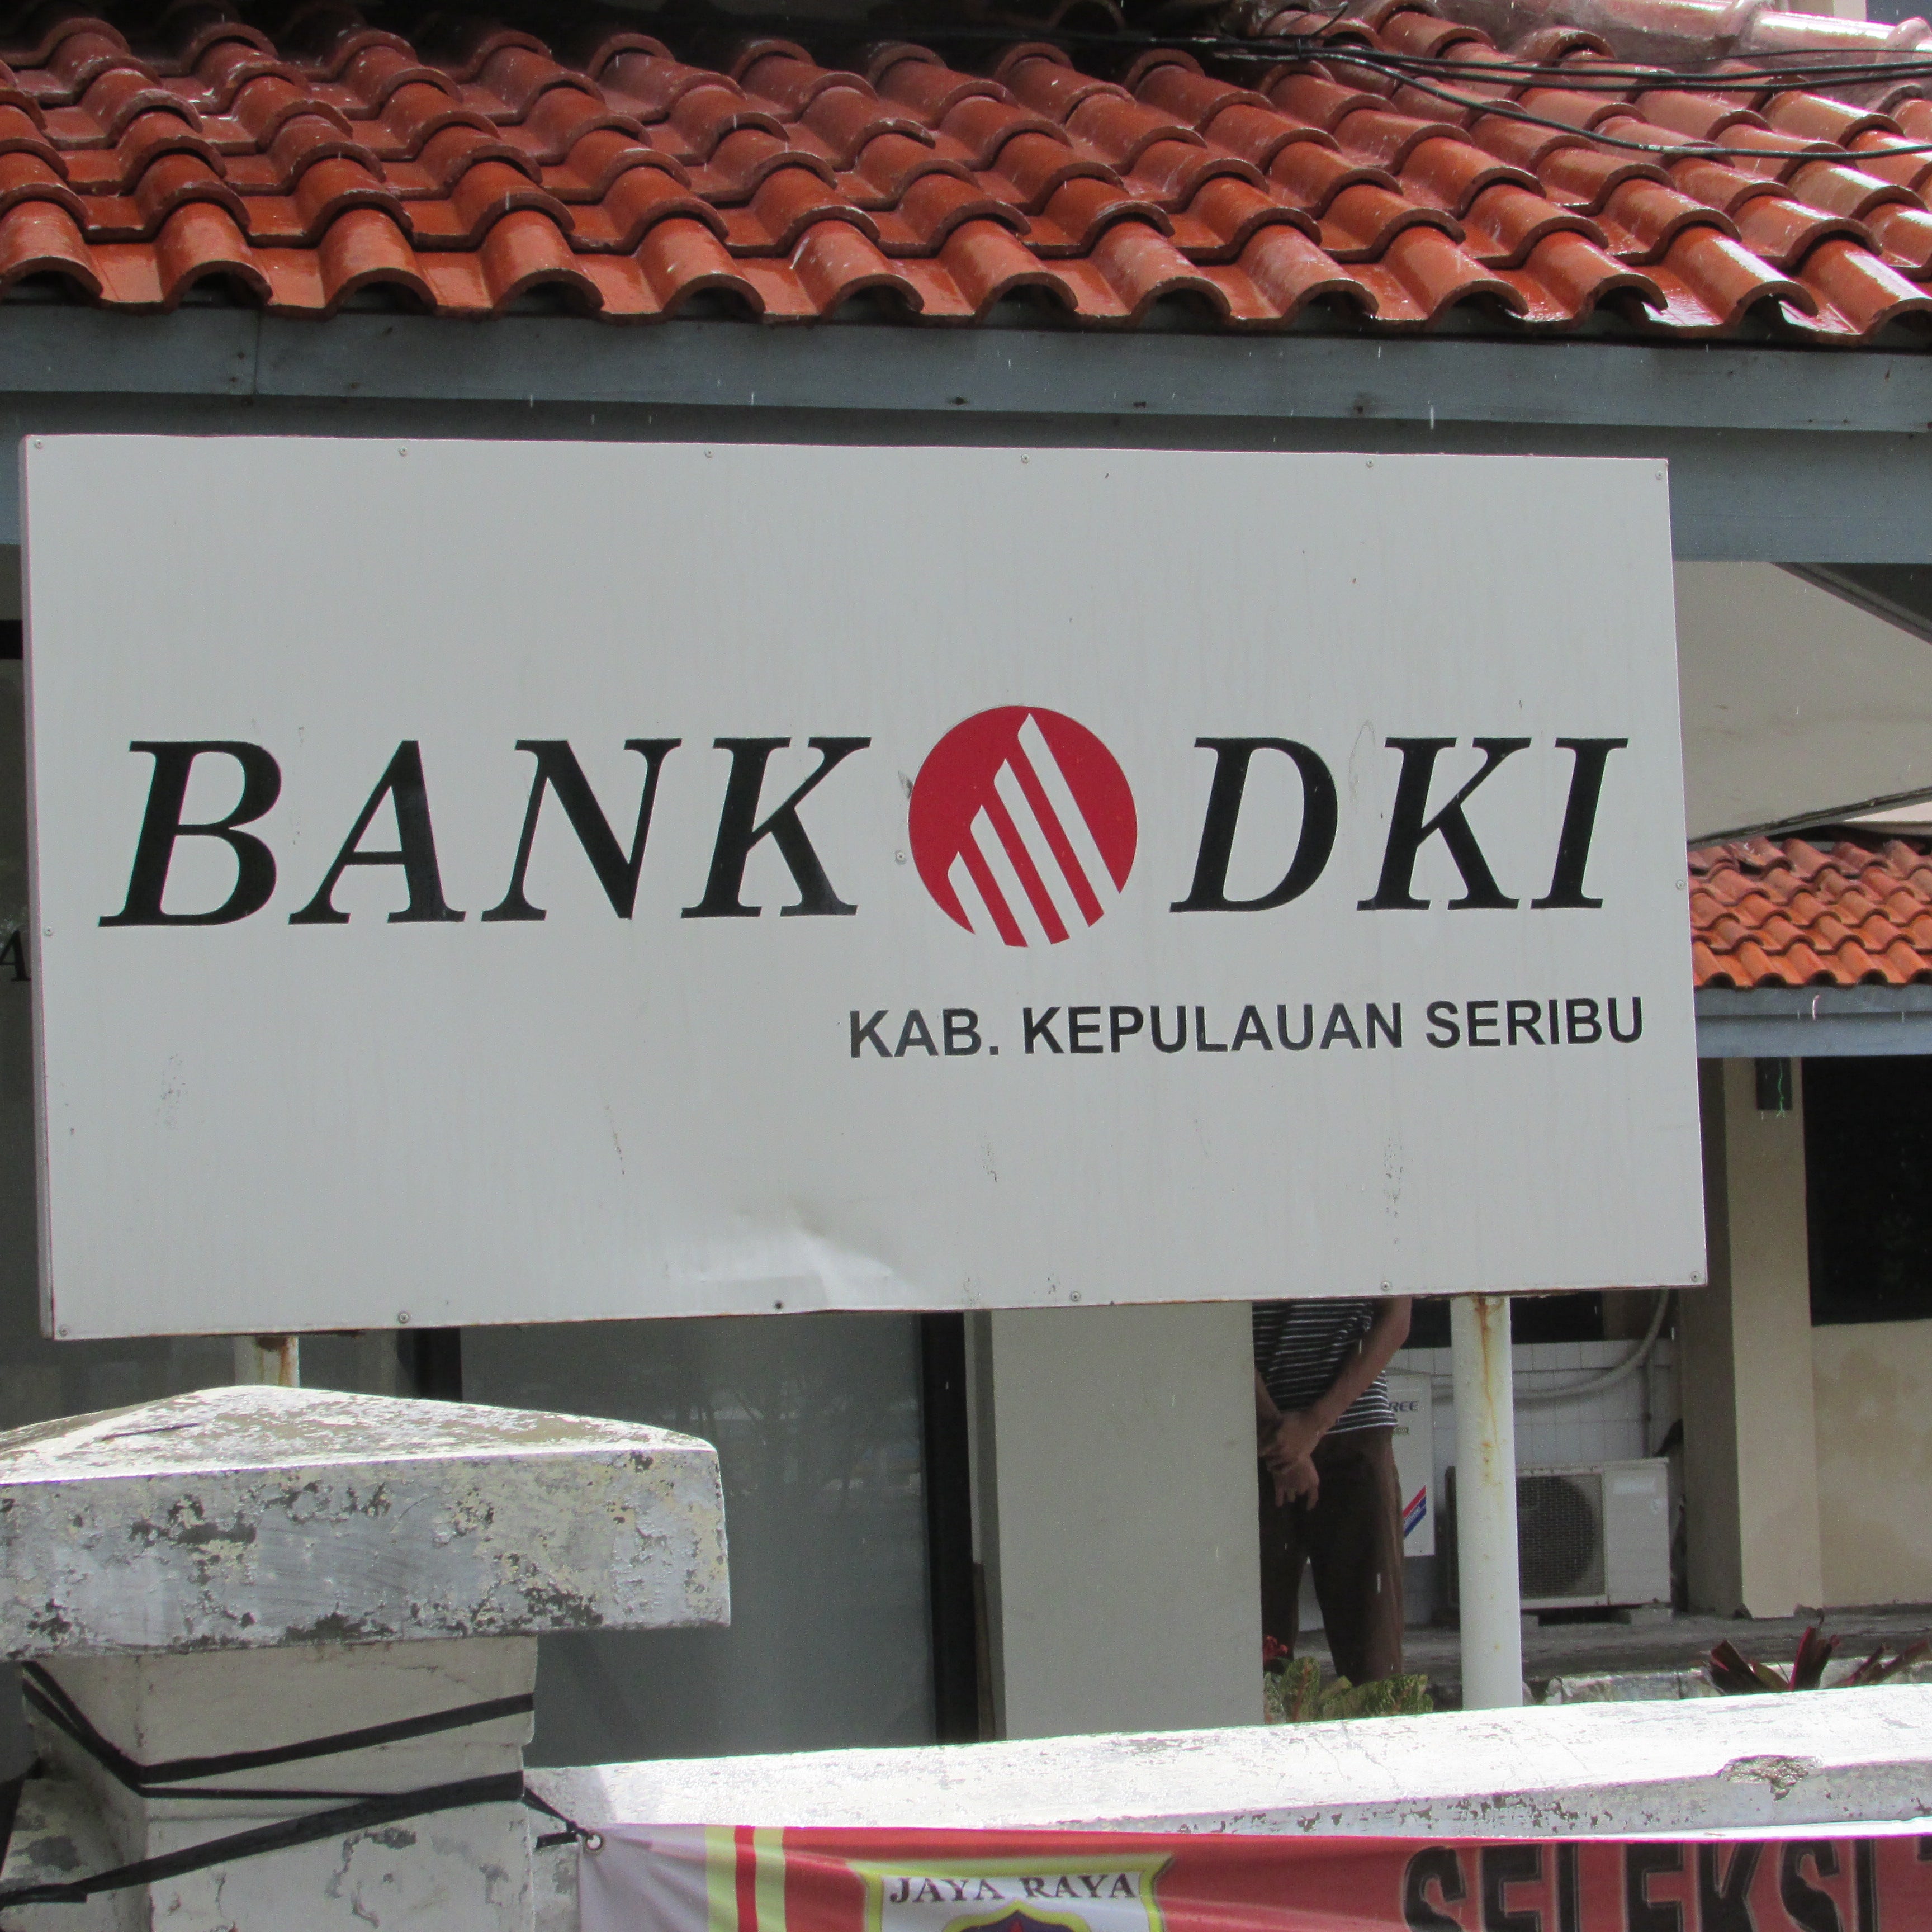 A bank in the Indonesian Islands